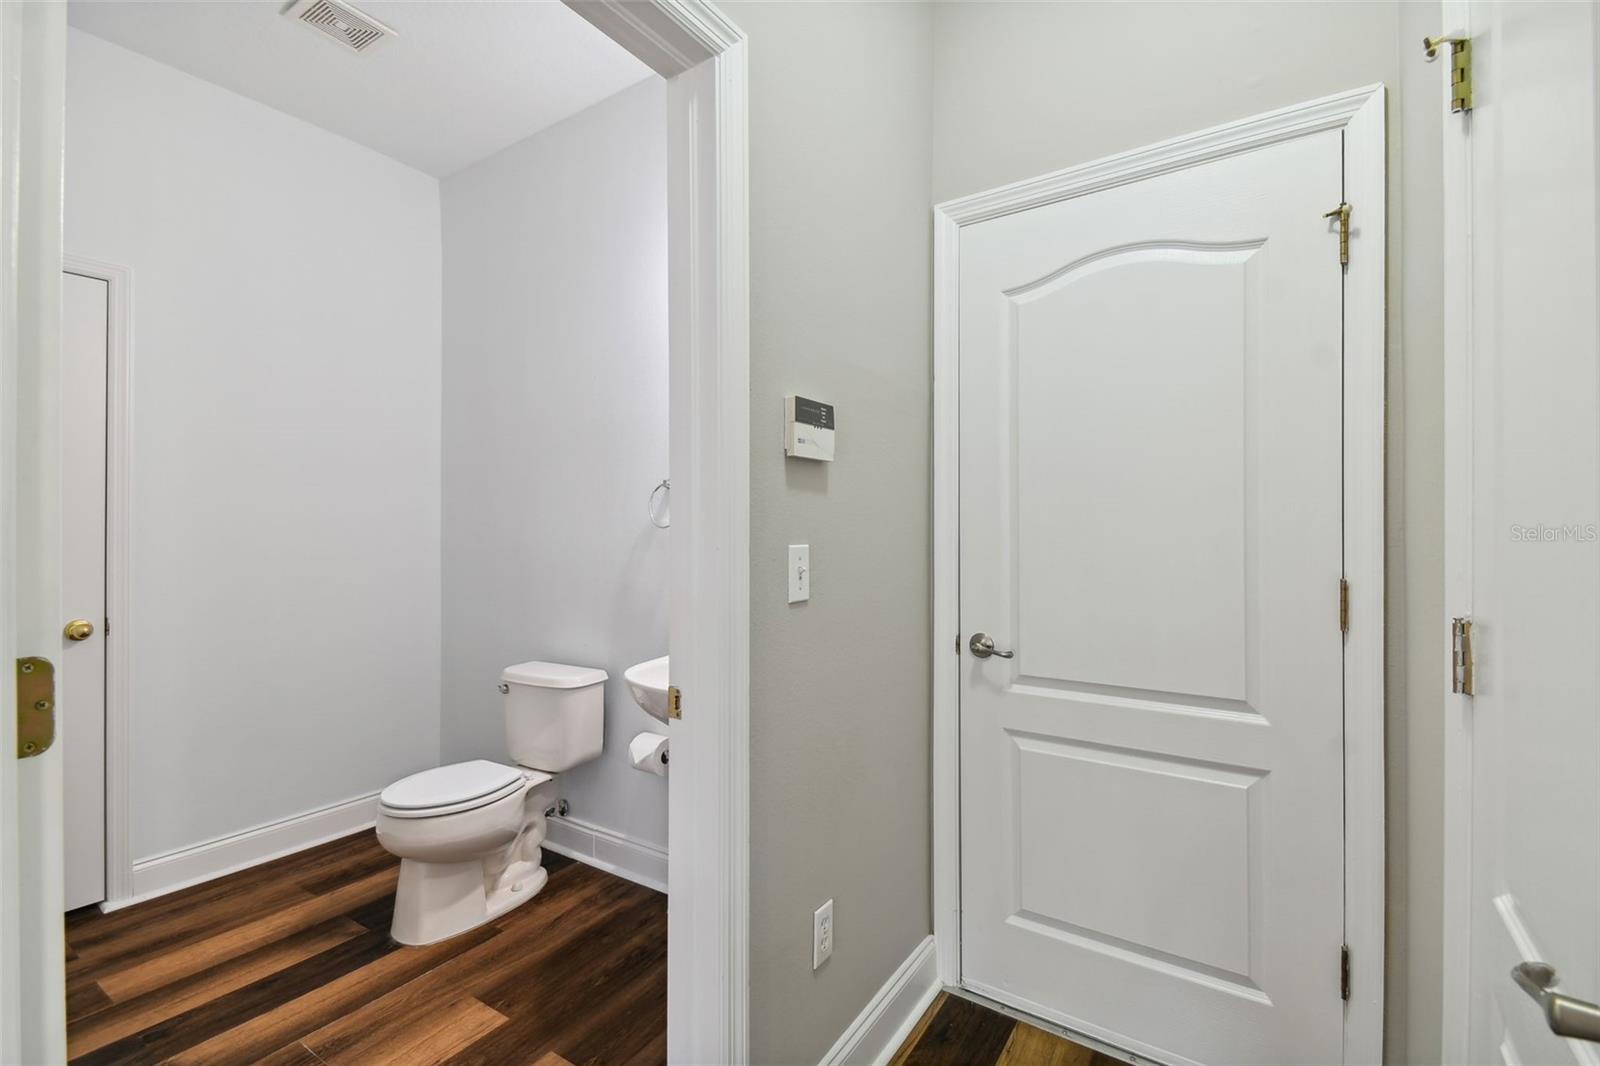 Potentially replace the closet with a shower for a third full bathroom.